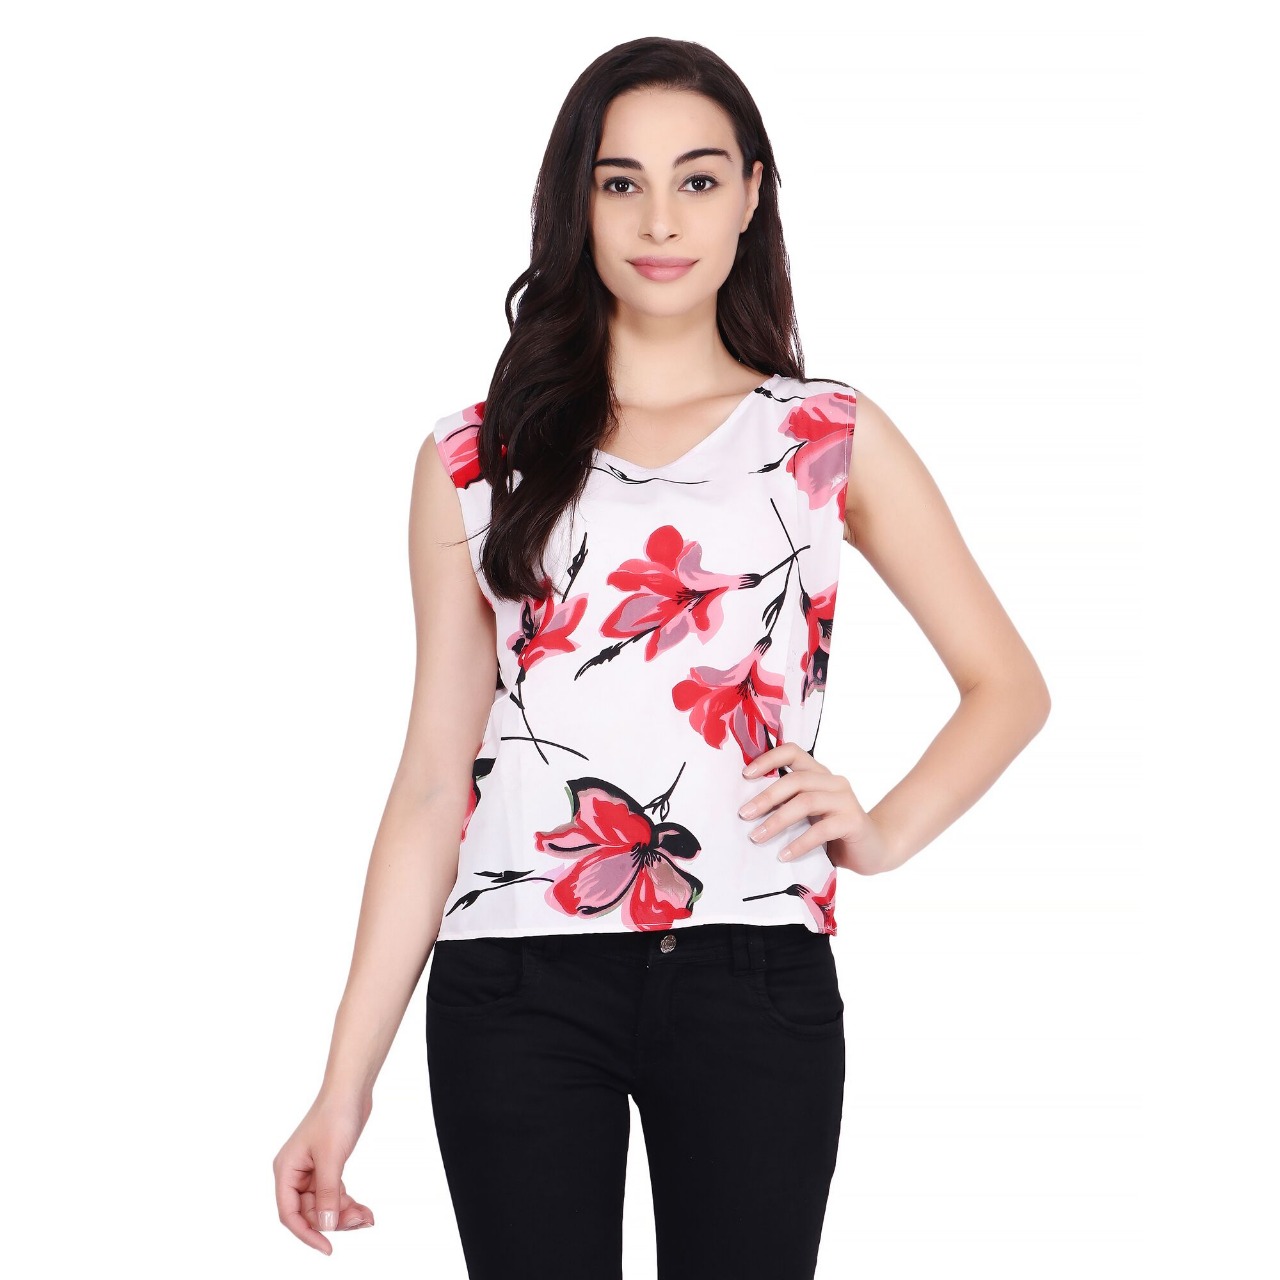 Adorable Crepe Printed Women's Top - StyloSale